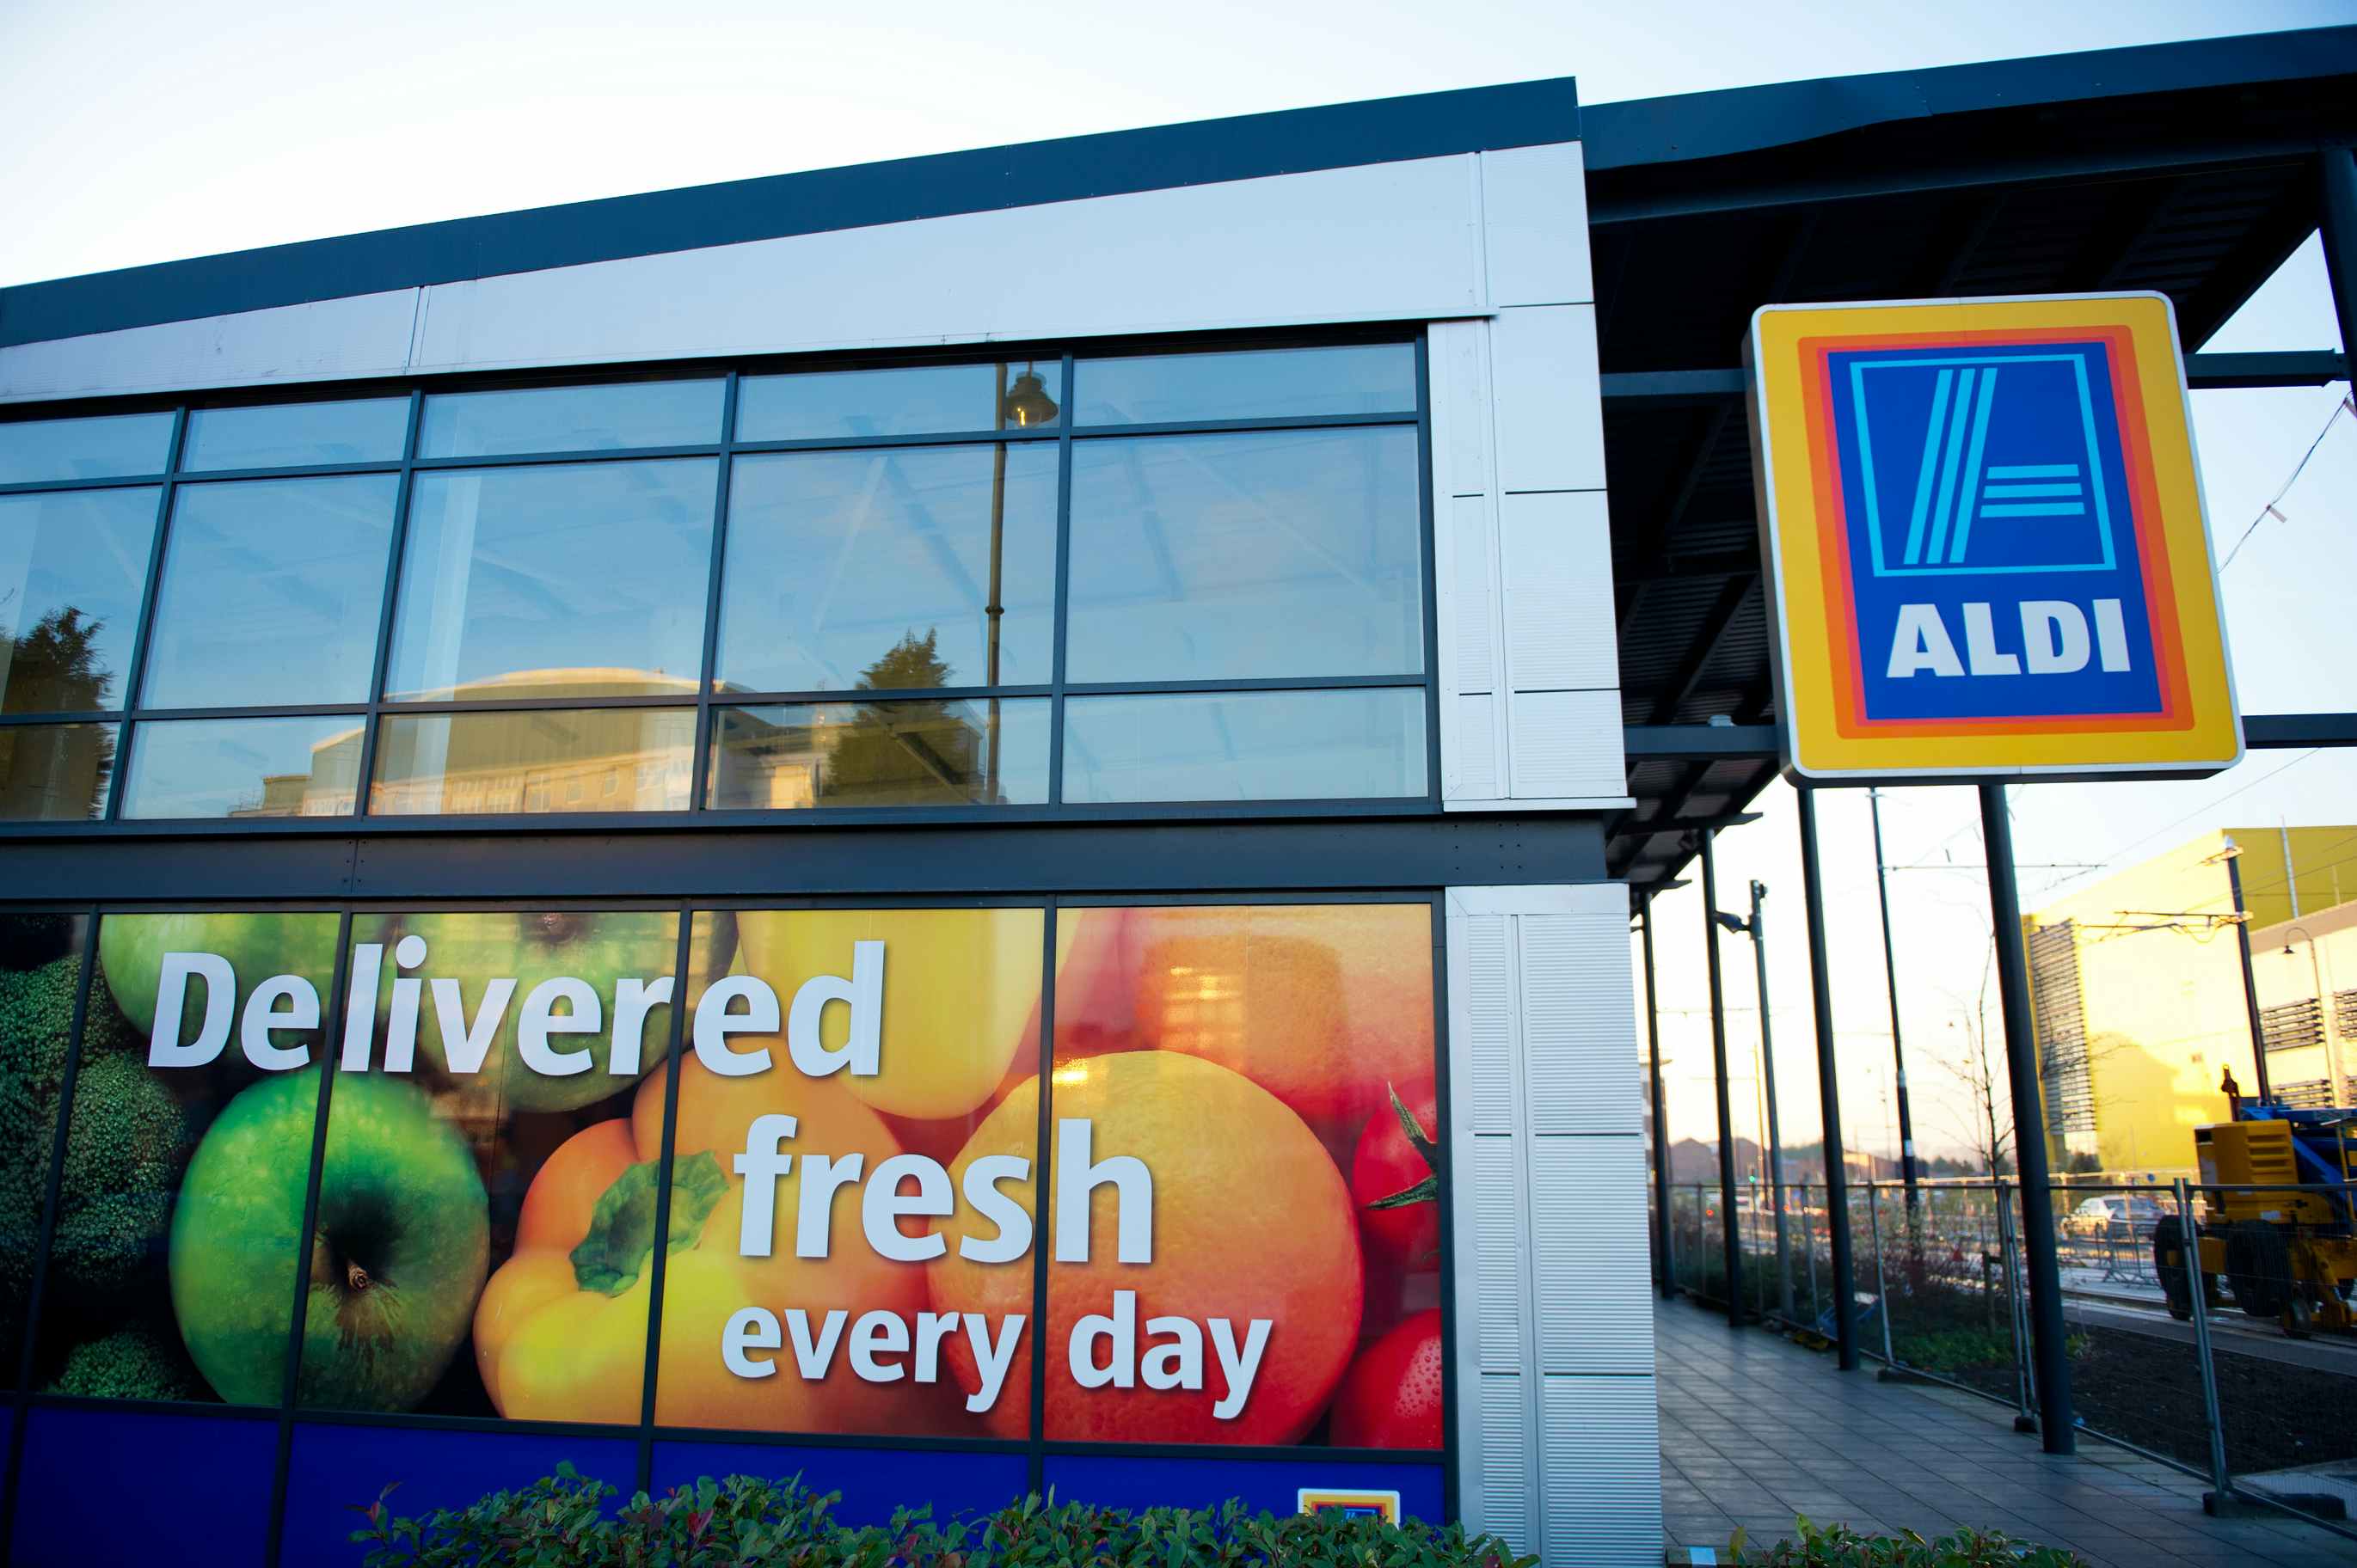 ALDI storefront with a big sign that says "Delivered fresh every day.